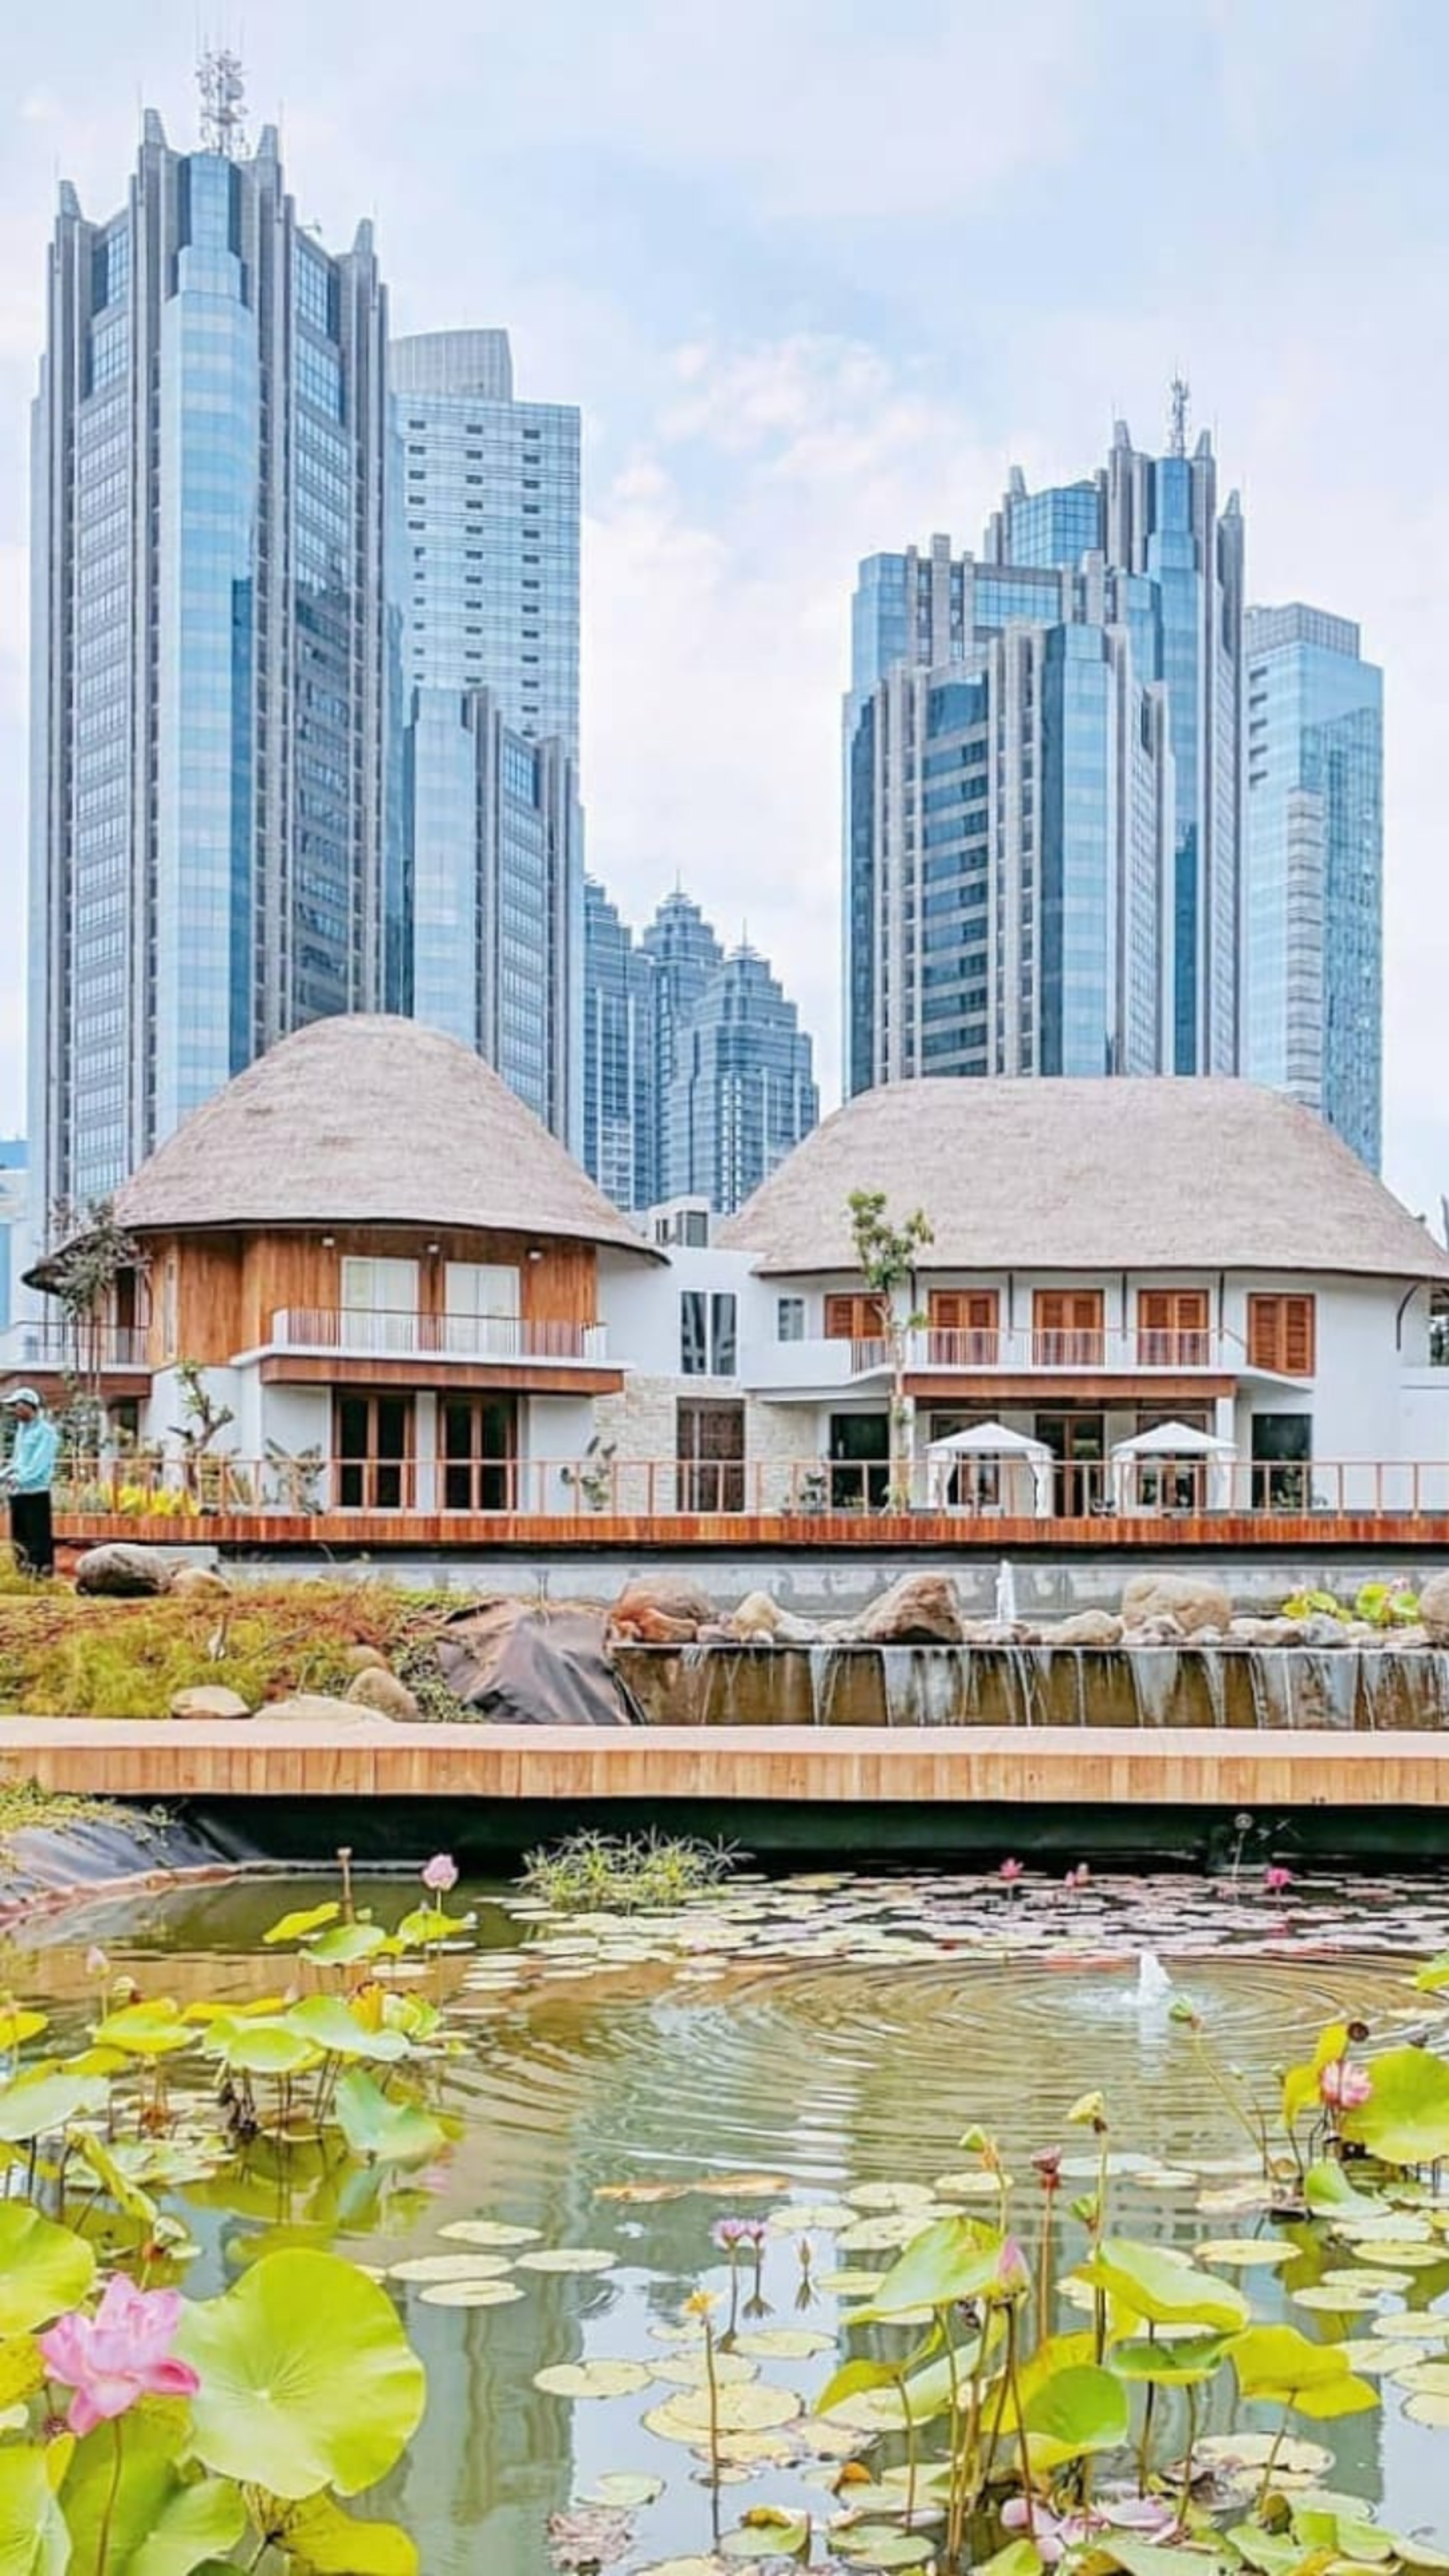 Traditional thatched-roof huts contrast with towering modern skyscrapers, reflecting a blend of old and new architecture by a tranquil city pond with blooming lotuses.